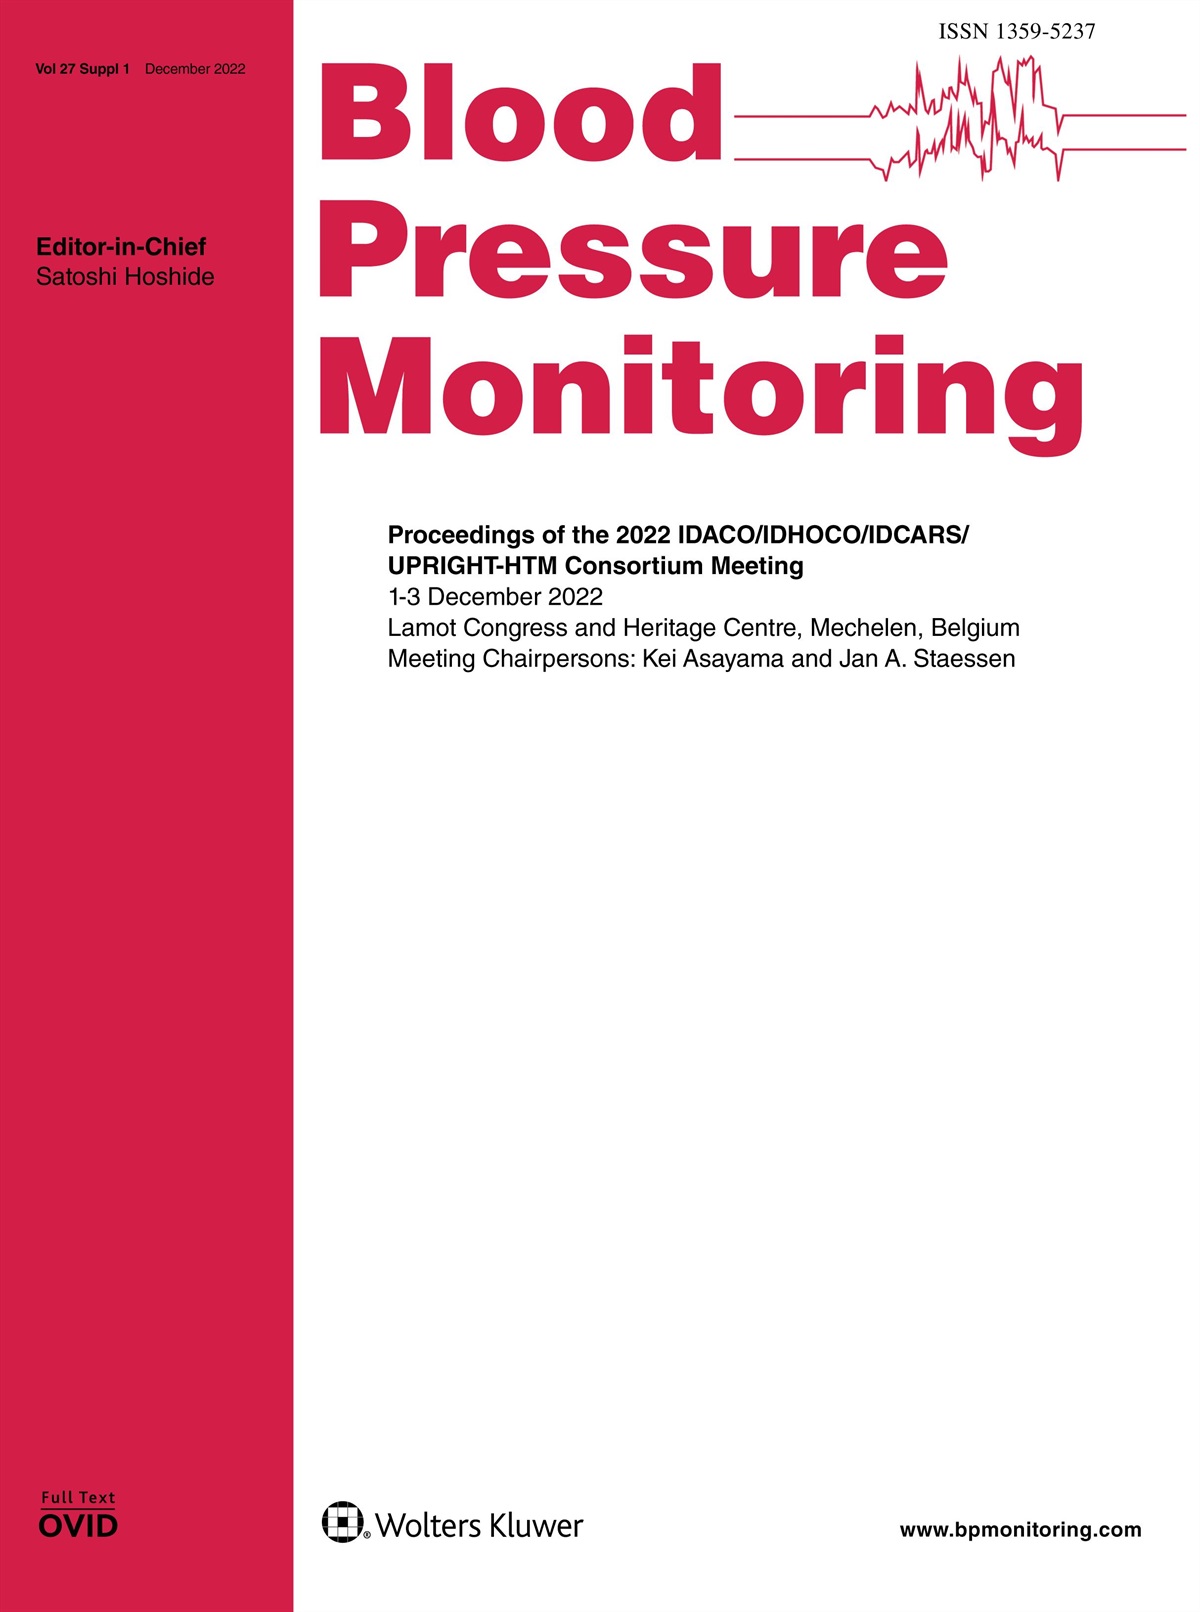 The potential of blood pressure telemonitoring: experience in the UK and Japan